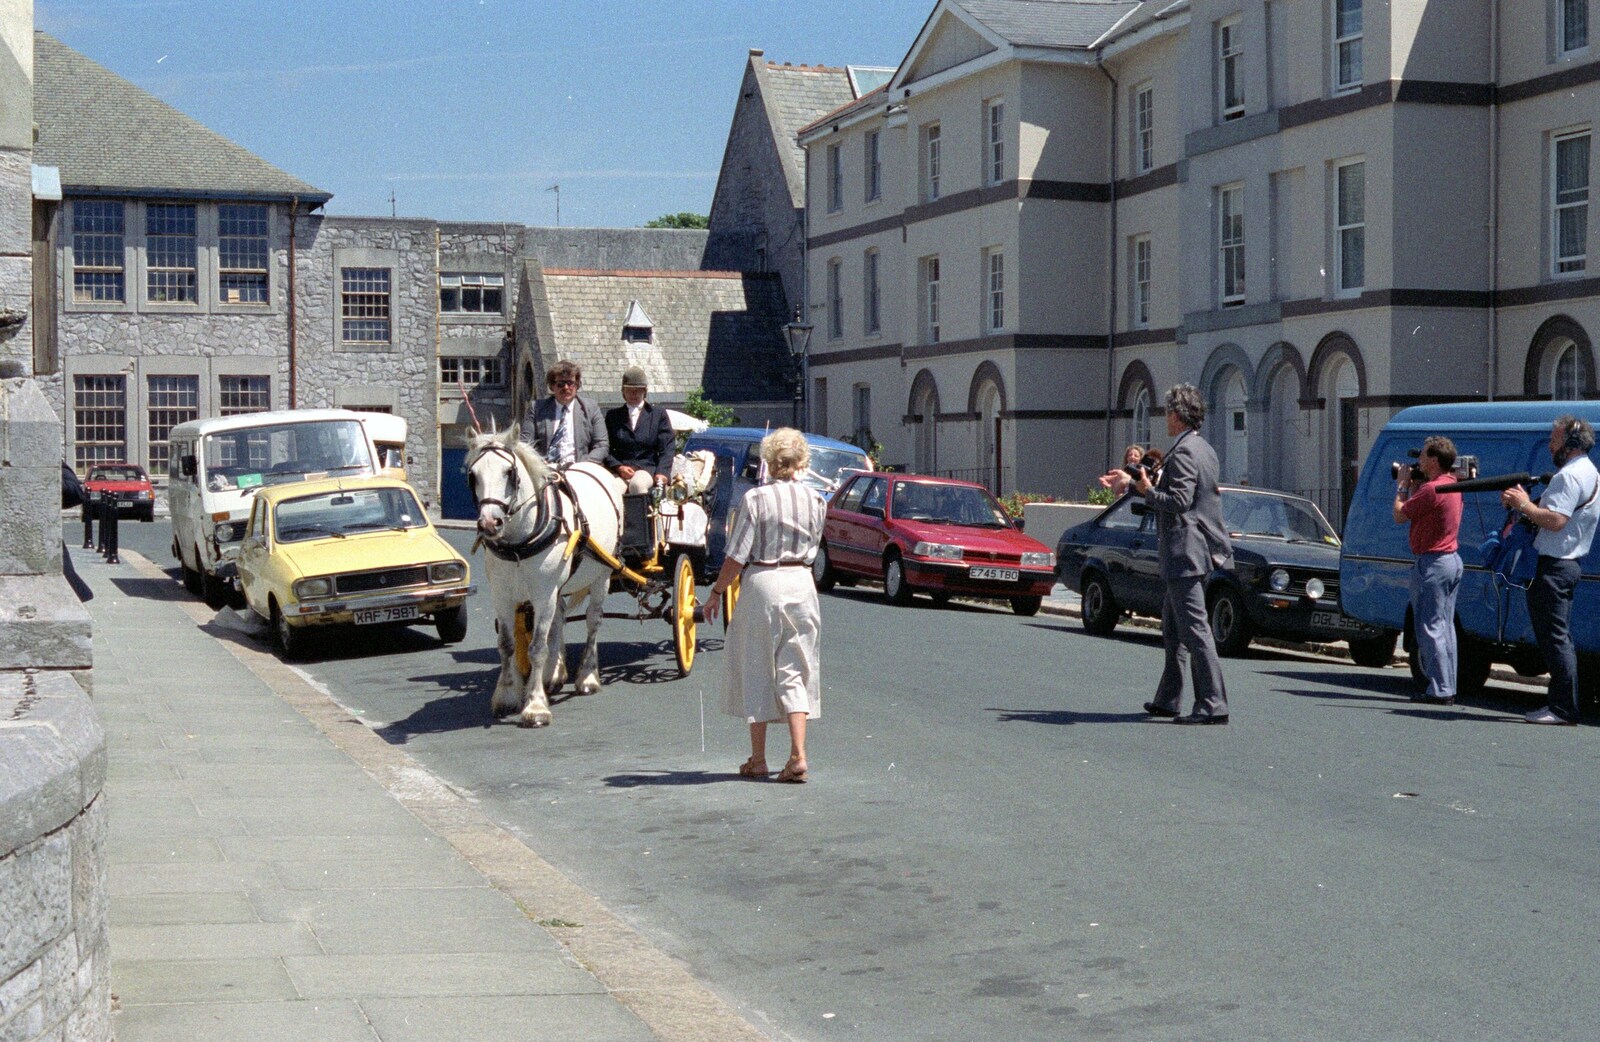 A horse and cart from Uni: Risky Business, A Wedding Occurs and Dave Leaves, Wyndham Square, Plymouth - 15th July 1989